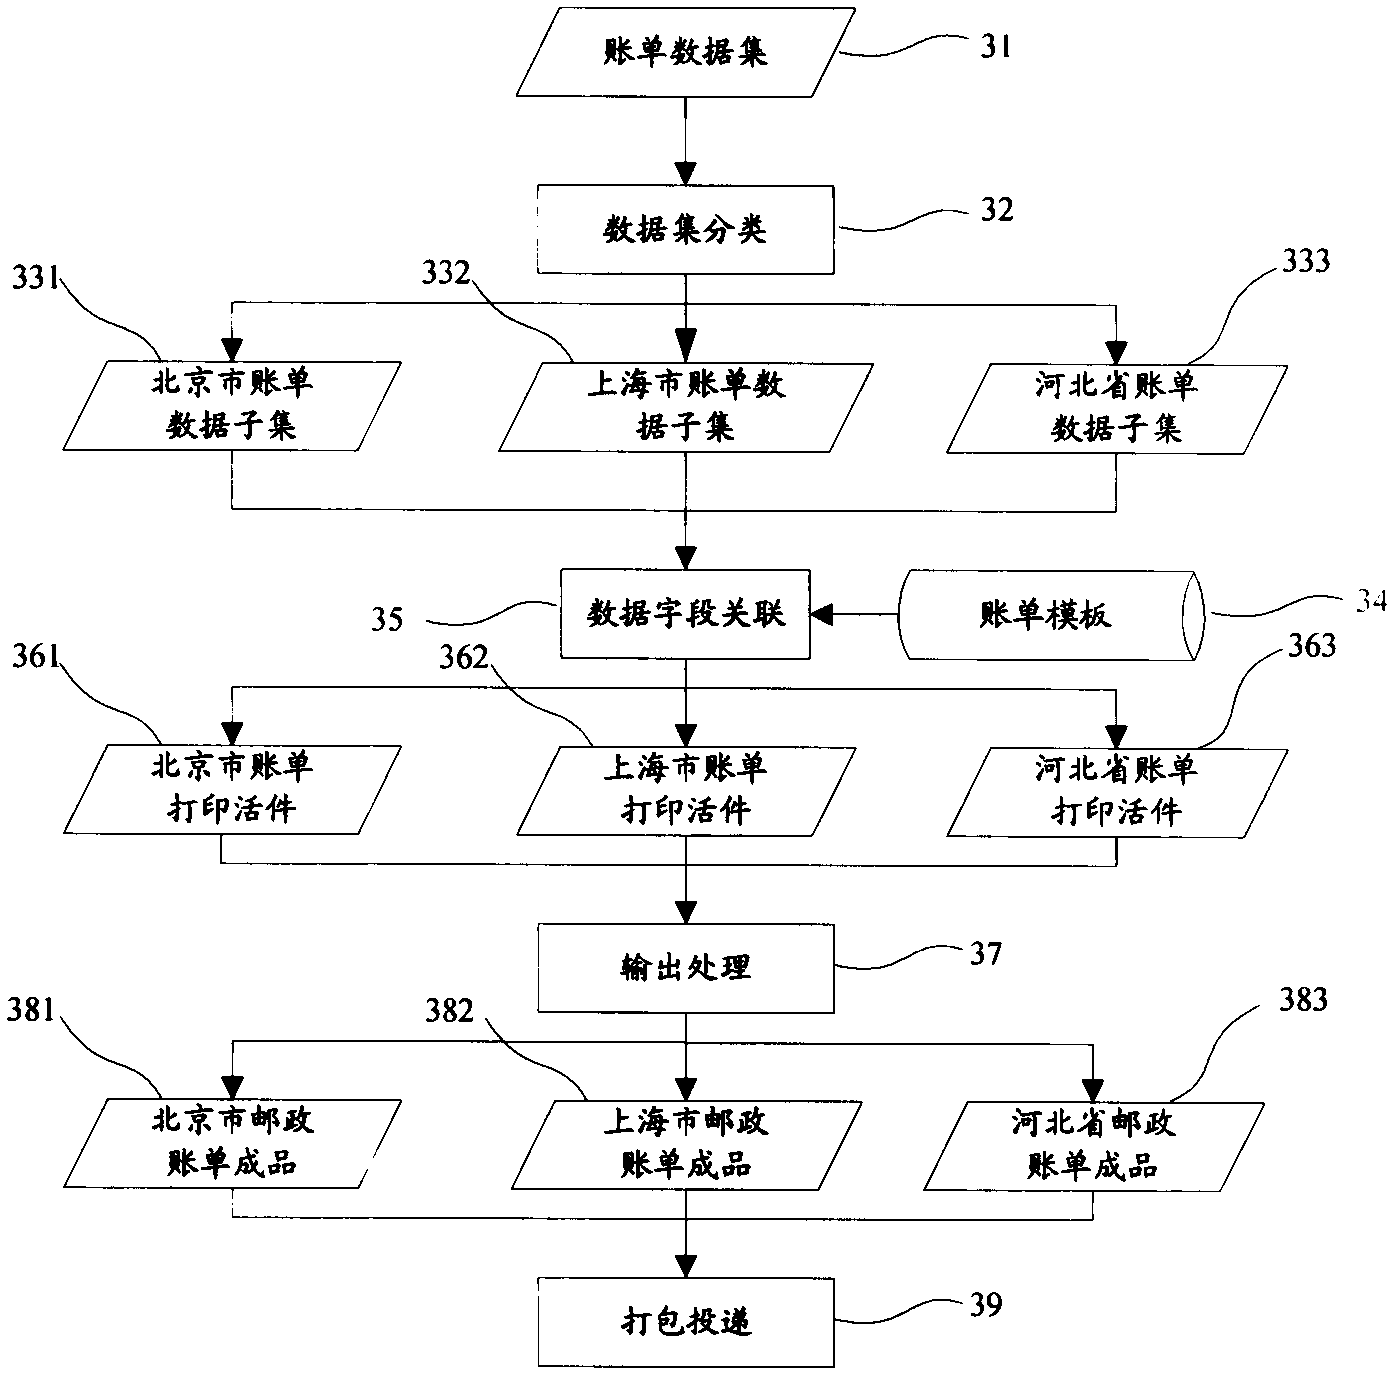 Method and device for processing postal bills